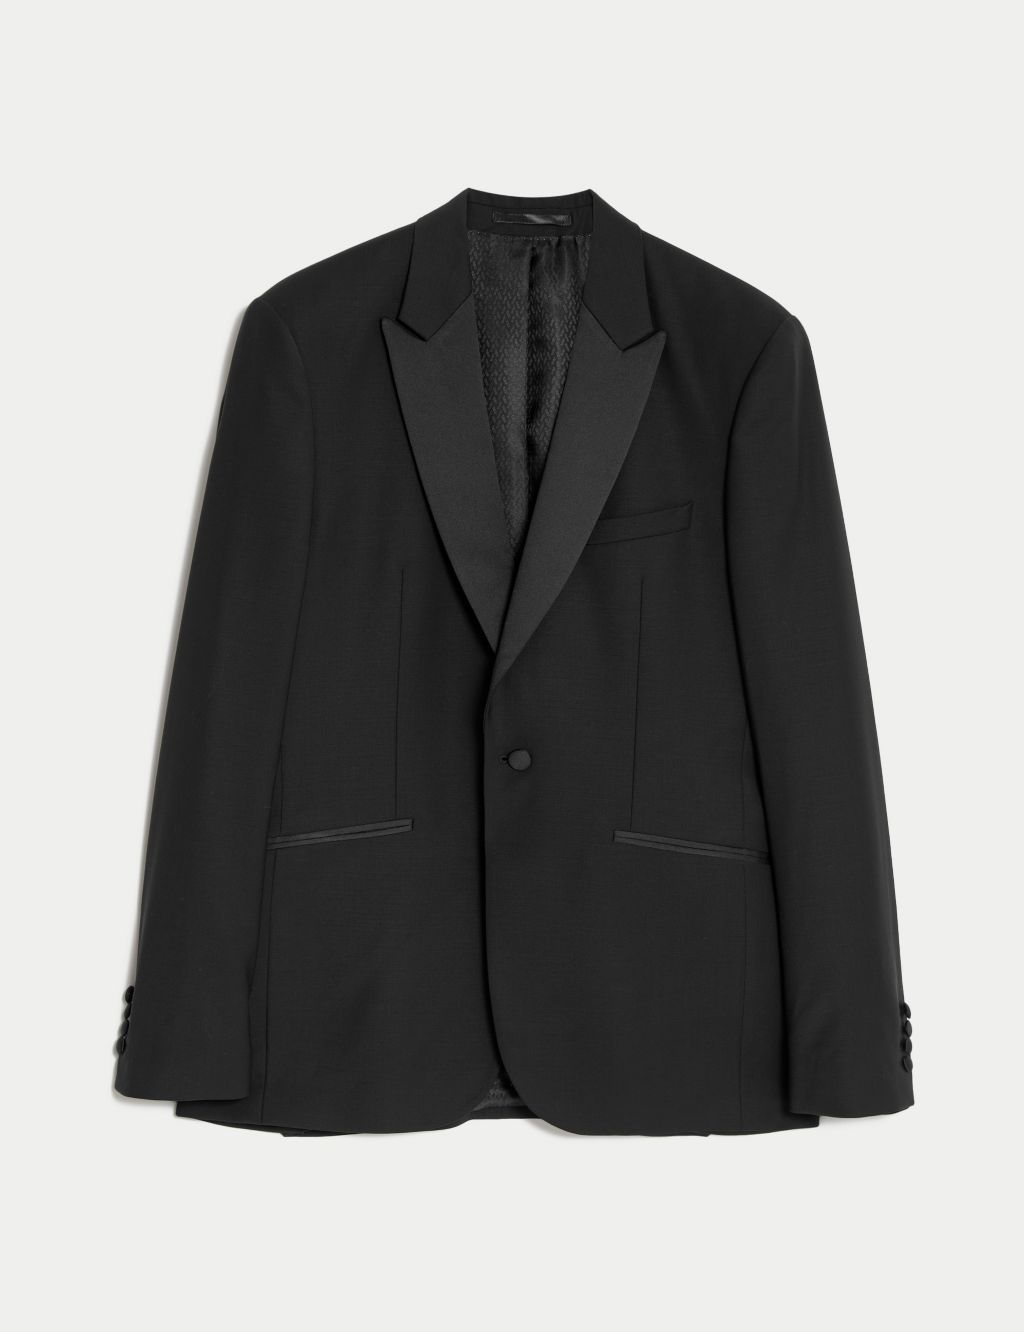 Tailored Fit Wool Rich Tuxedo Jacket image 1